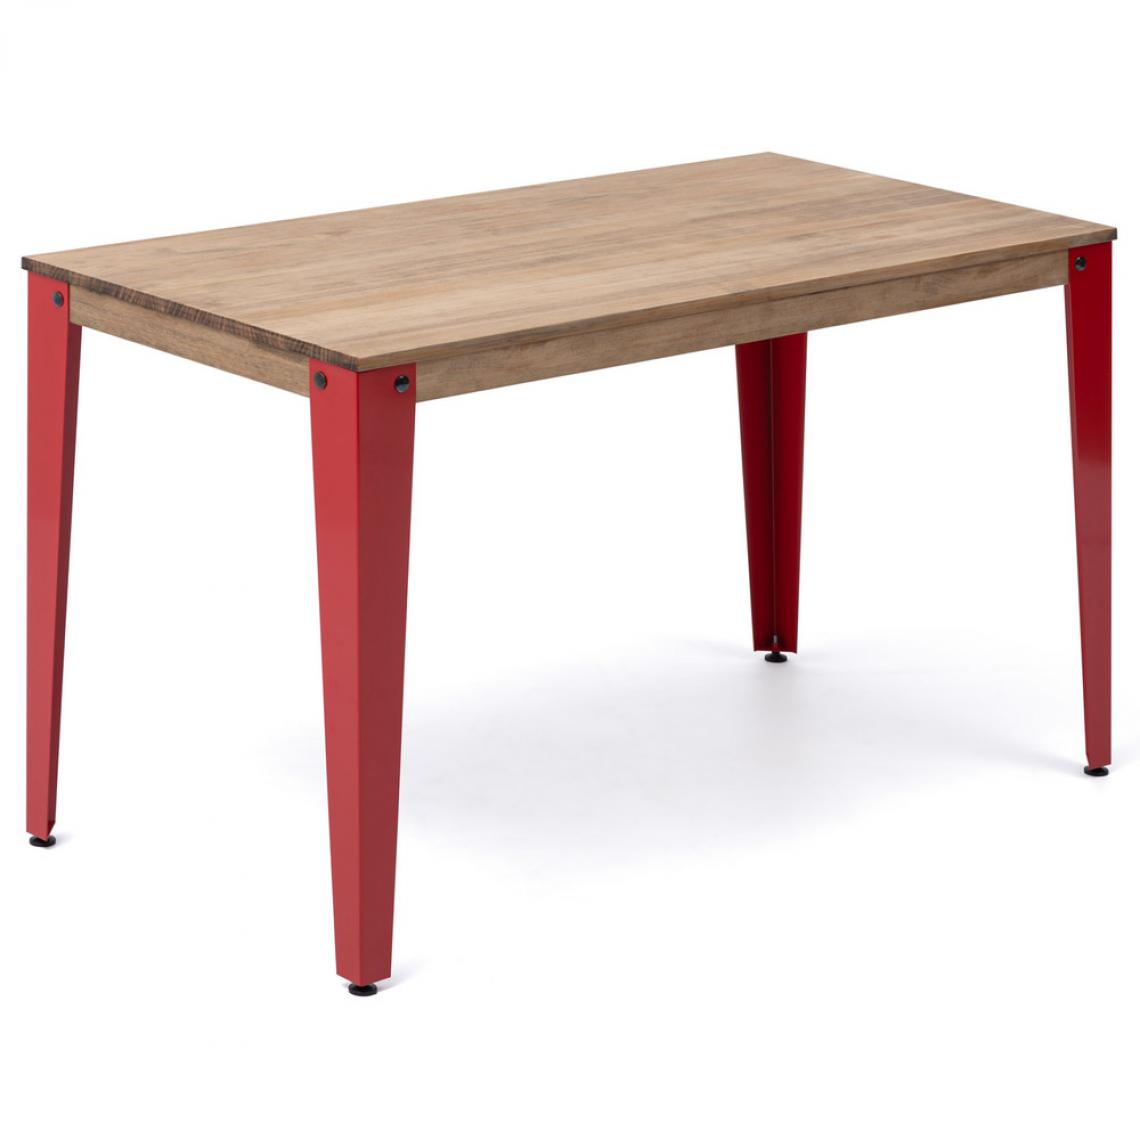 BOX FURNITURE - Table Salle a Manger Lunds 160x90x75cm Rouge-Vieilli Box Furniture - Tables à manger